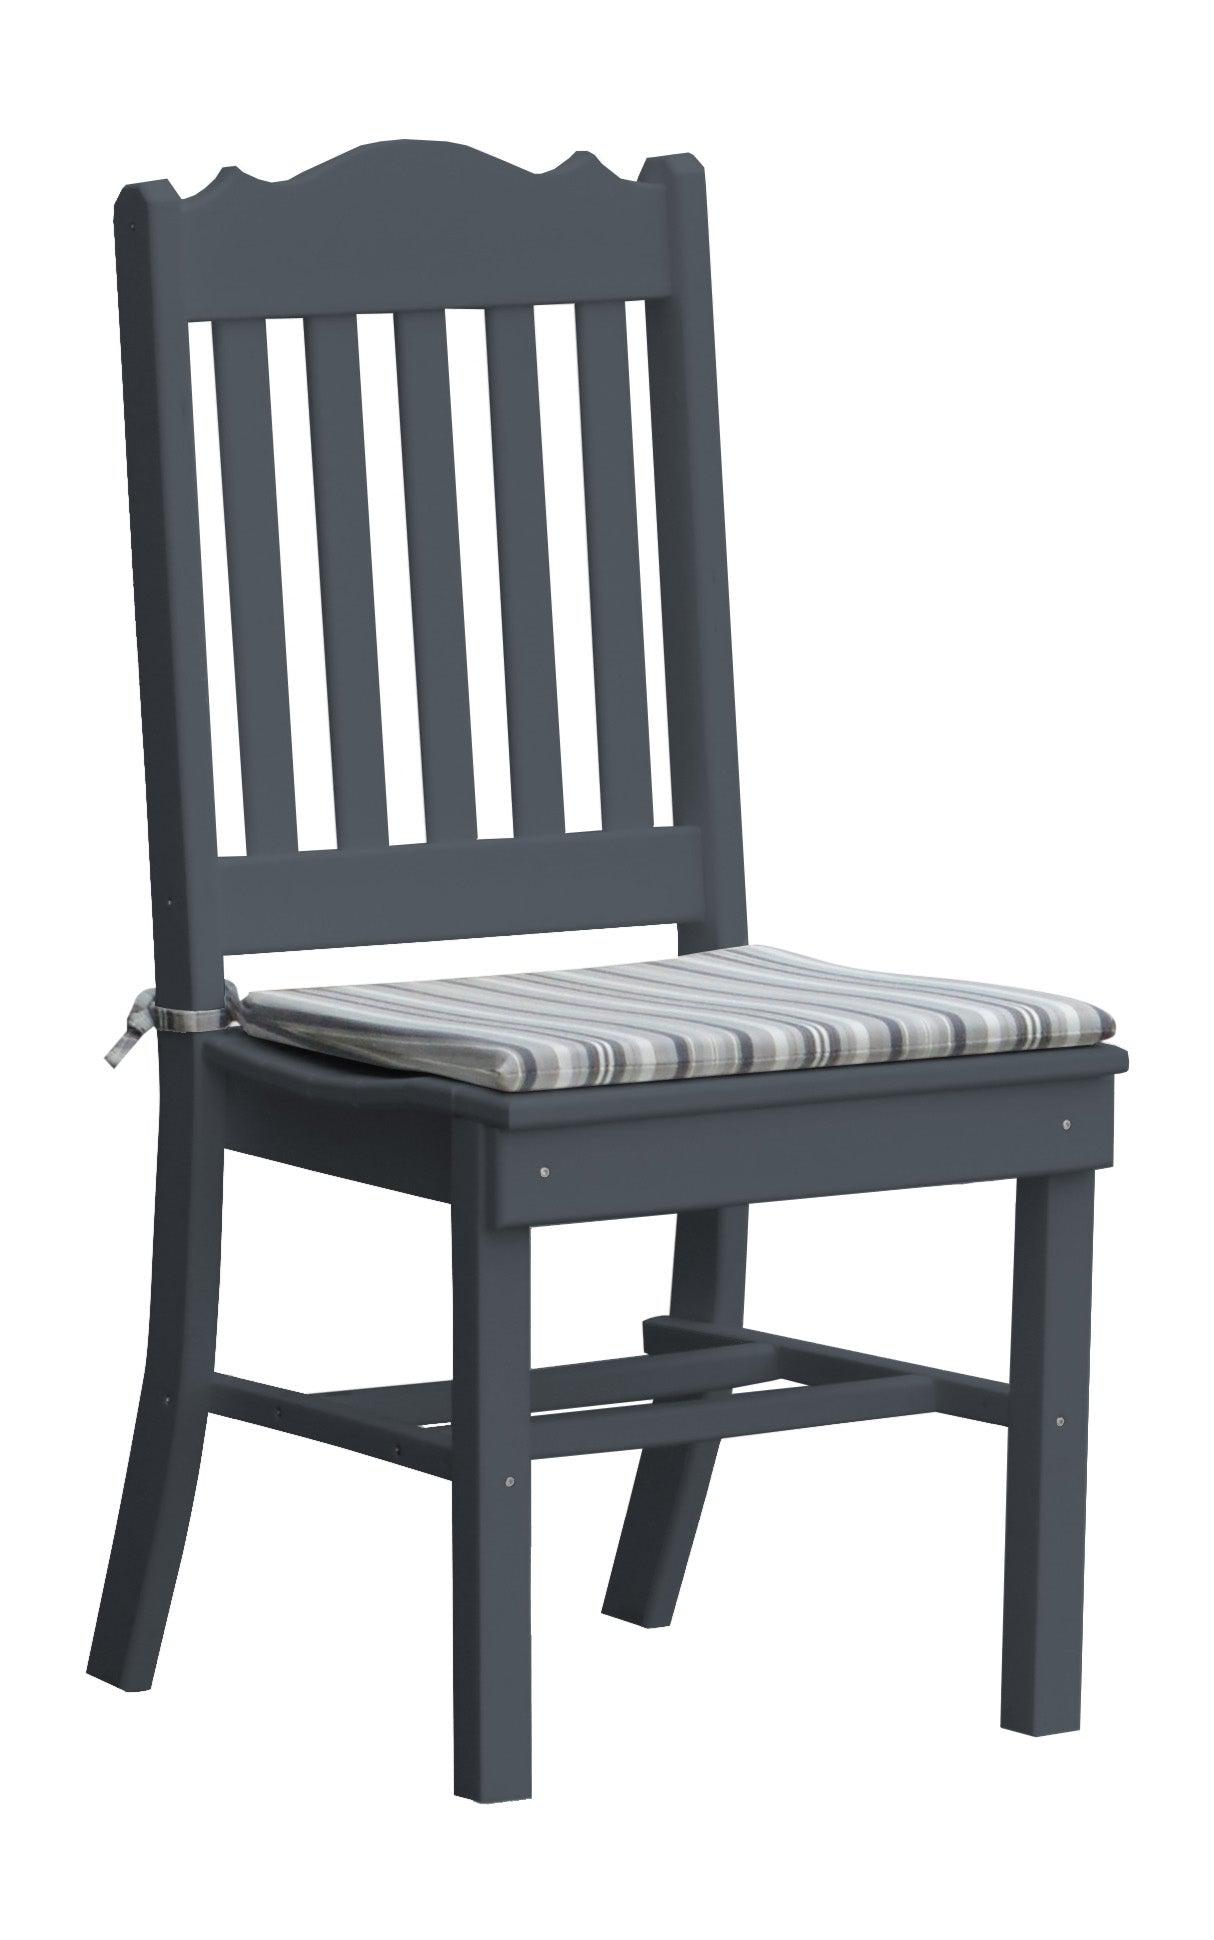 A&L Furniture Company Recycled Plastic Royal Dining Chair  - Dark Gray